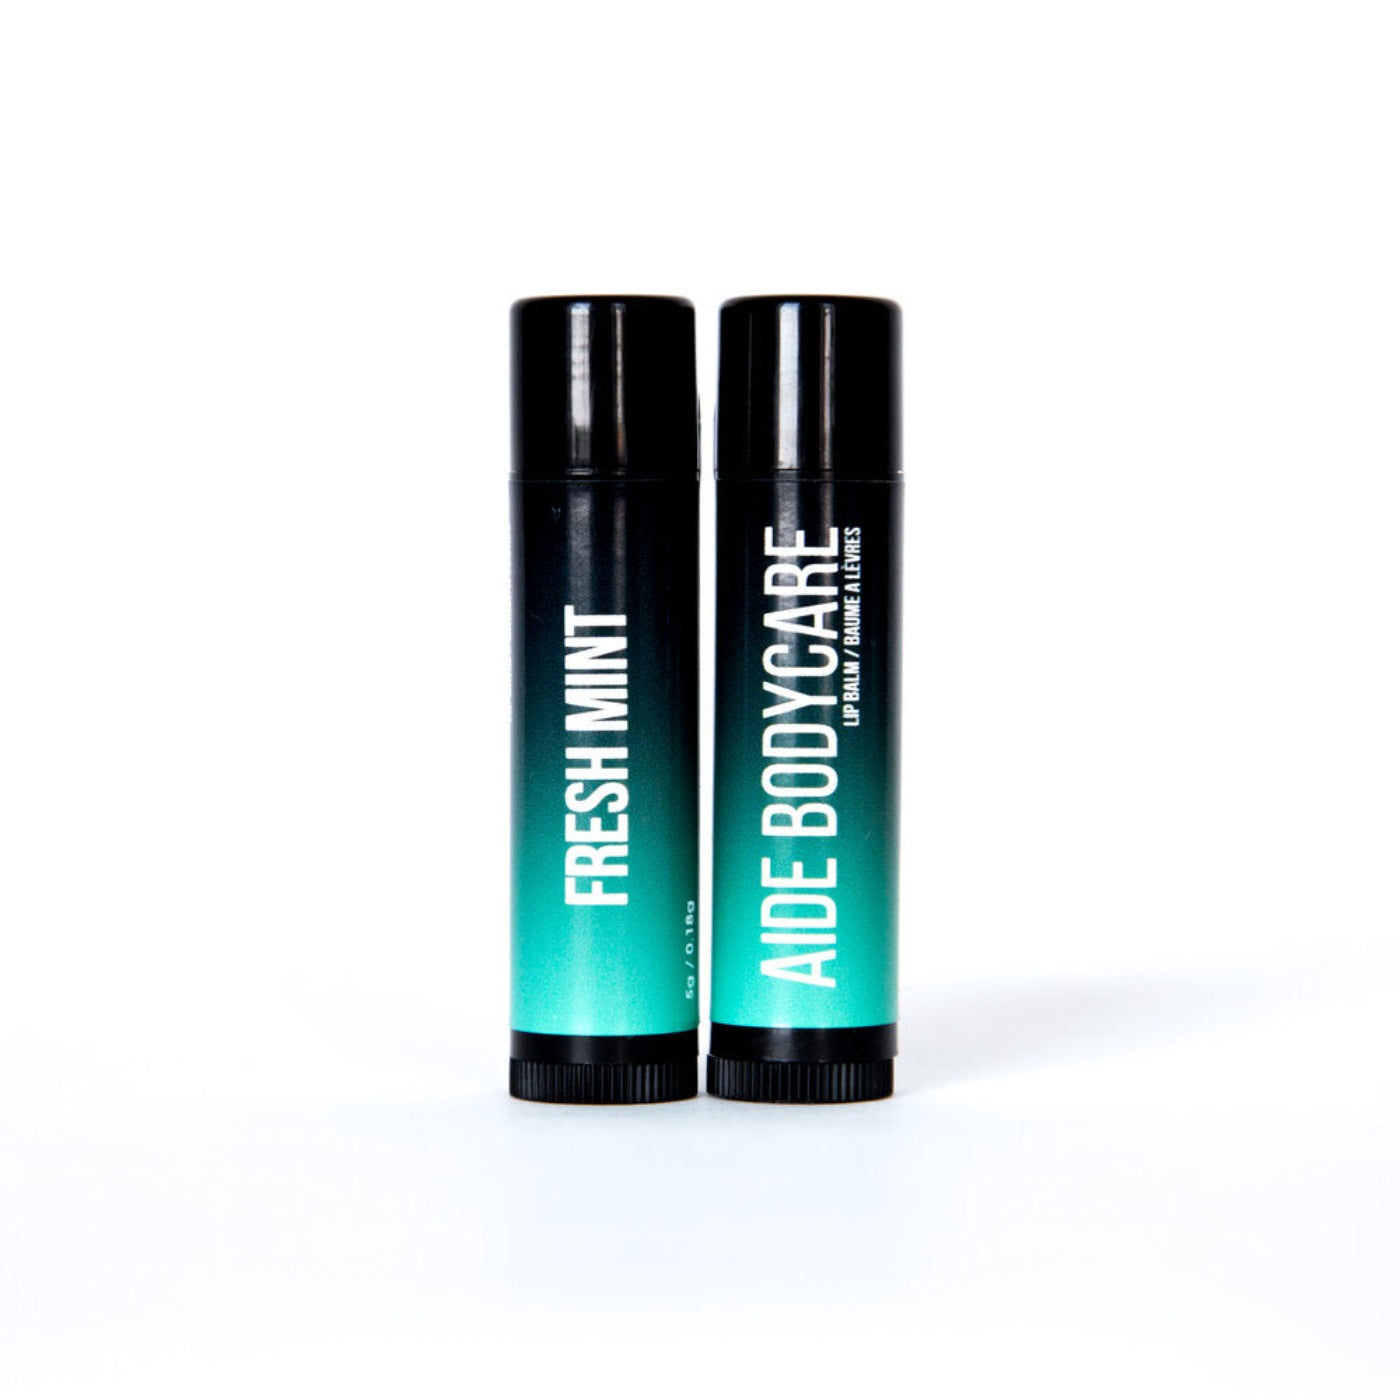 Lip balm with a black to teal gradient and text that says "Fresh Mint" on one side and "Aide Bodycare" on the other